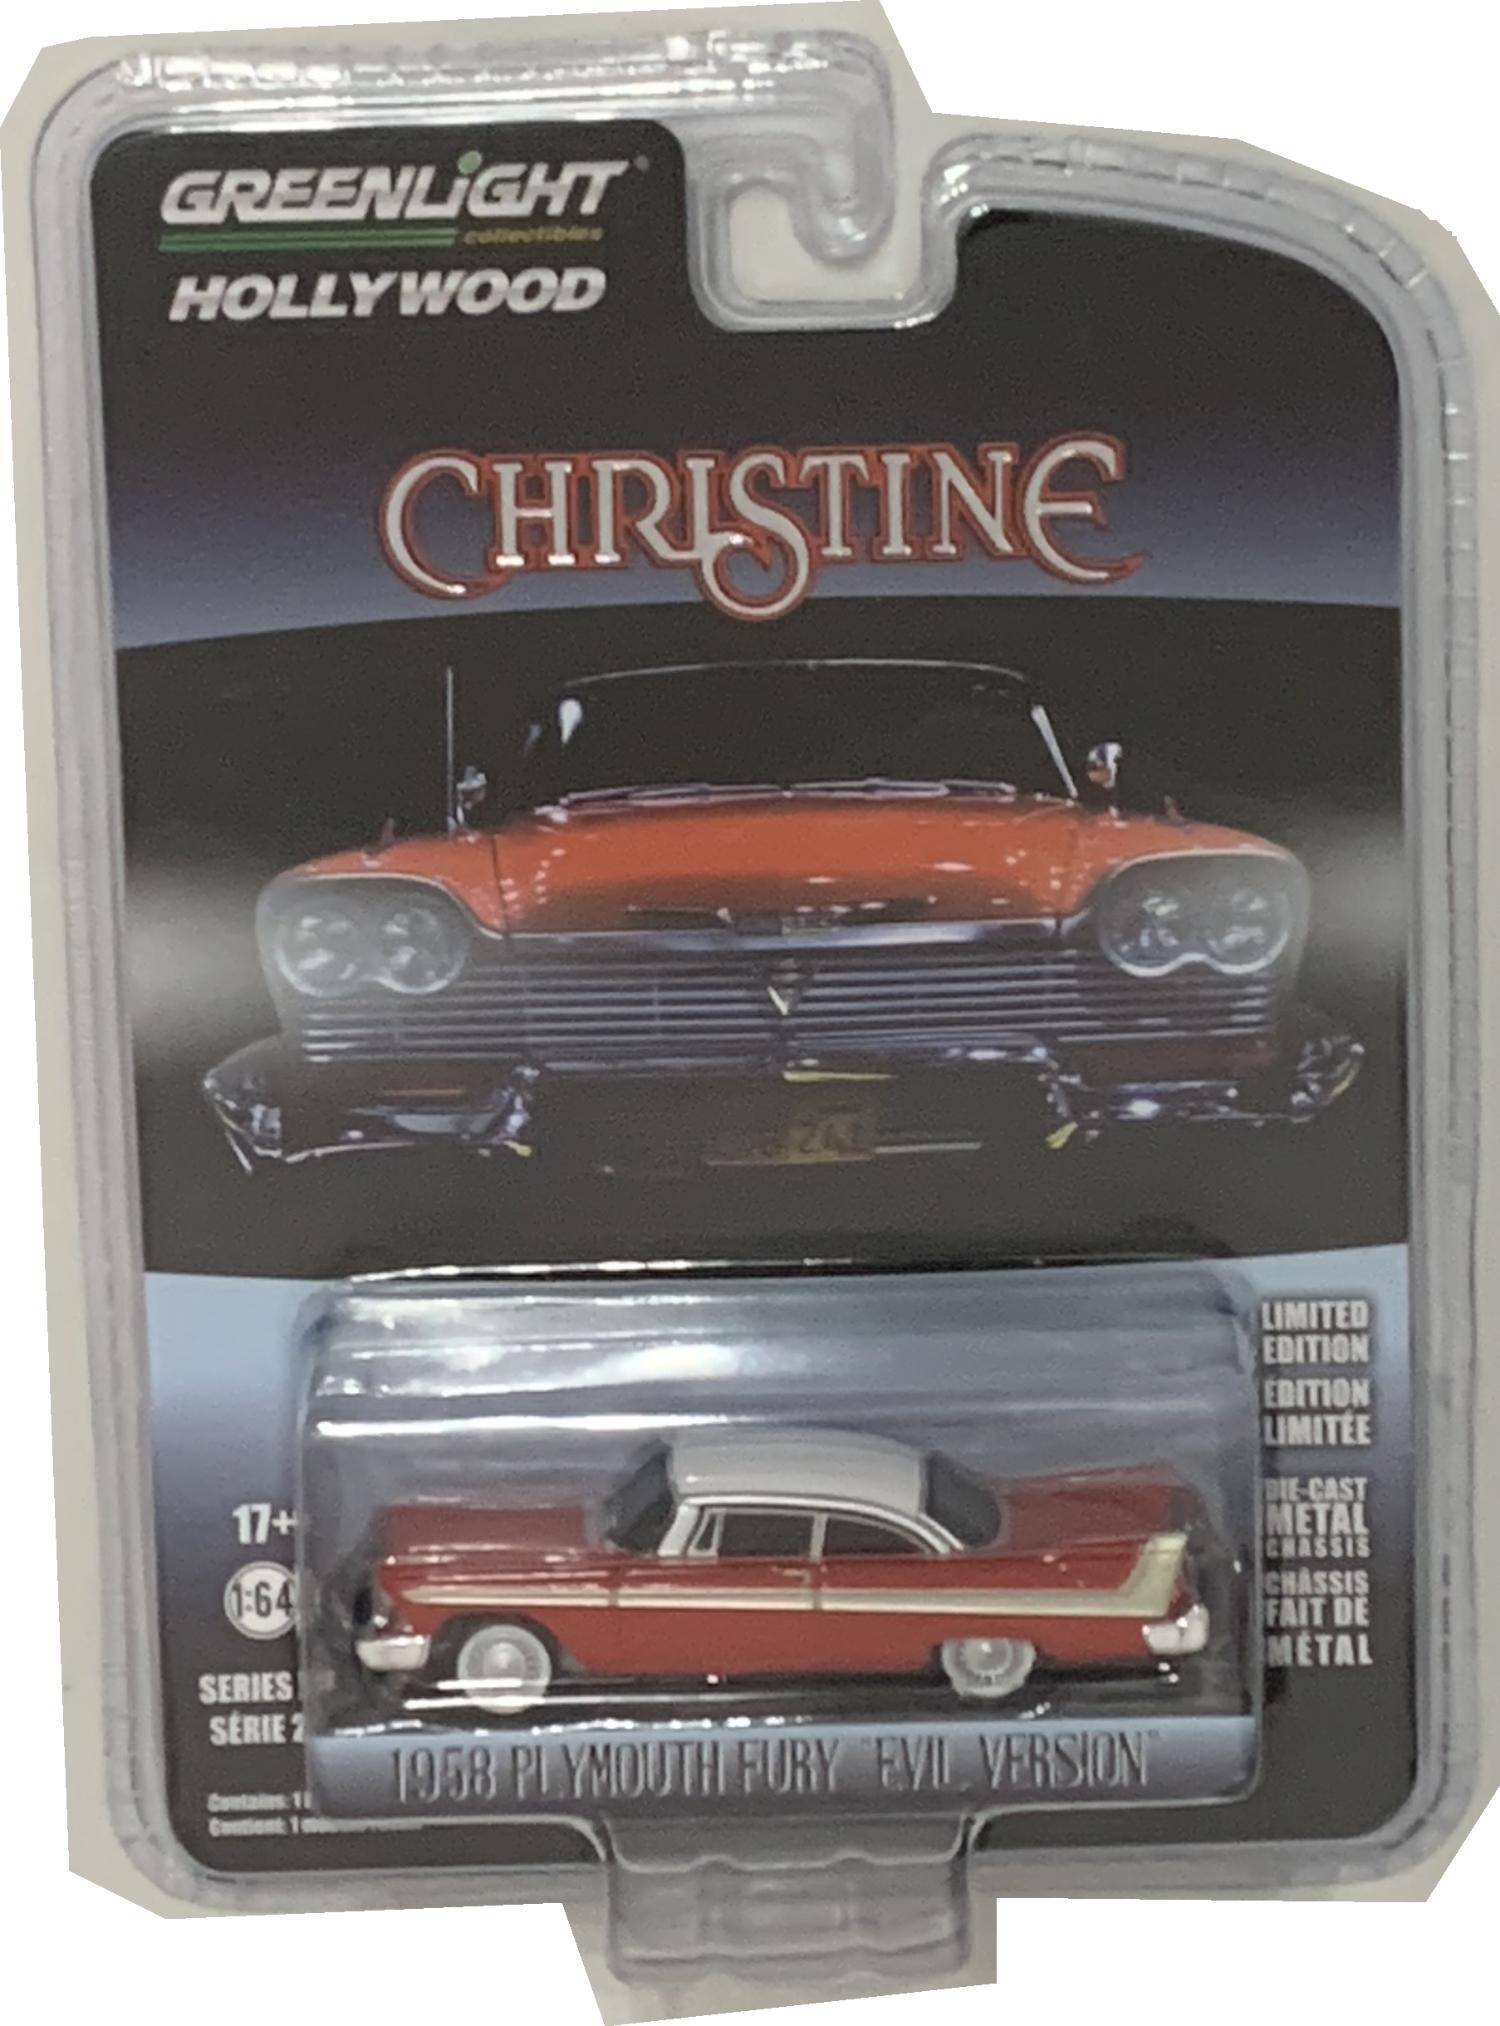 Christine 1958 Plymouth Fury, Evil Version, in red and white 1:64 scale model from Greenlight, limited edition model